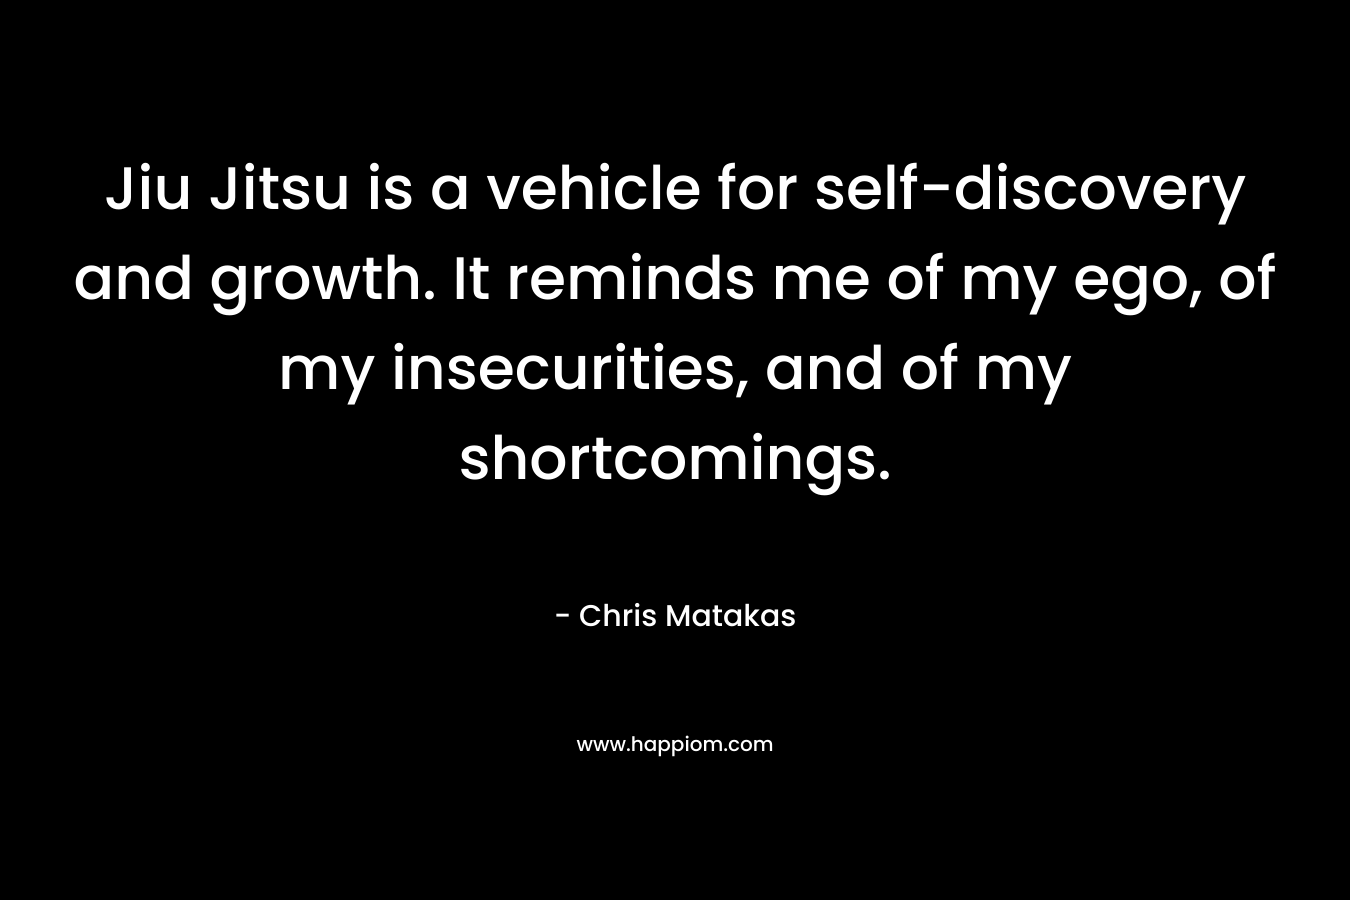 Jiu Jitsu is a vehicle for self-discovery and growth. It reminds me of my ego, of my insecurities, and of my shortcomings. – Chris Matakas